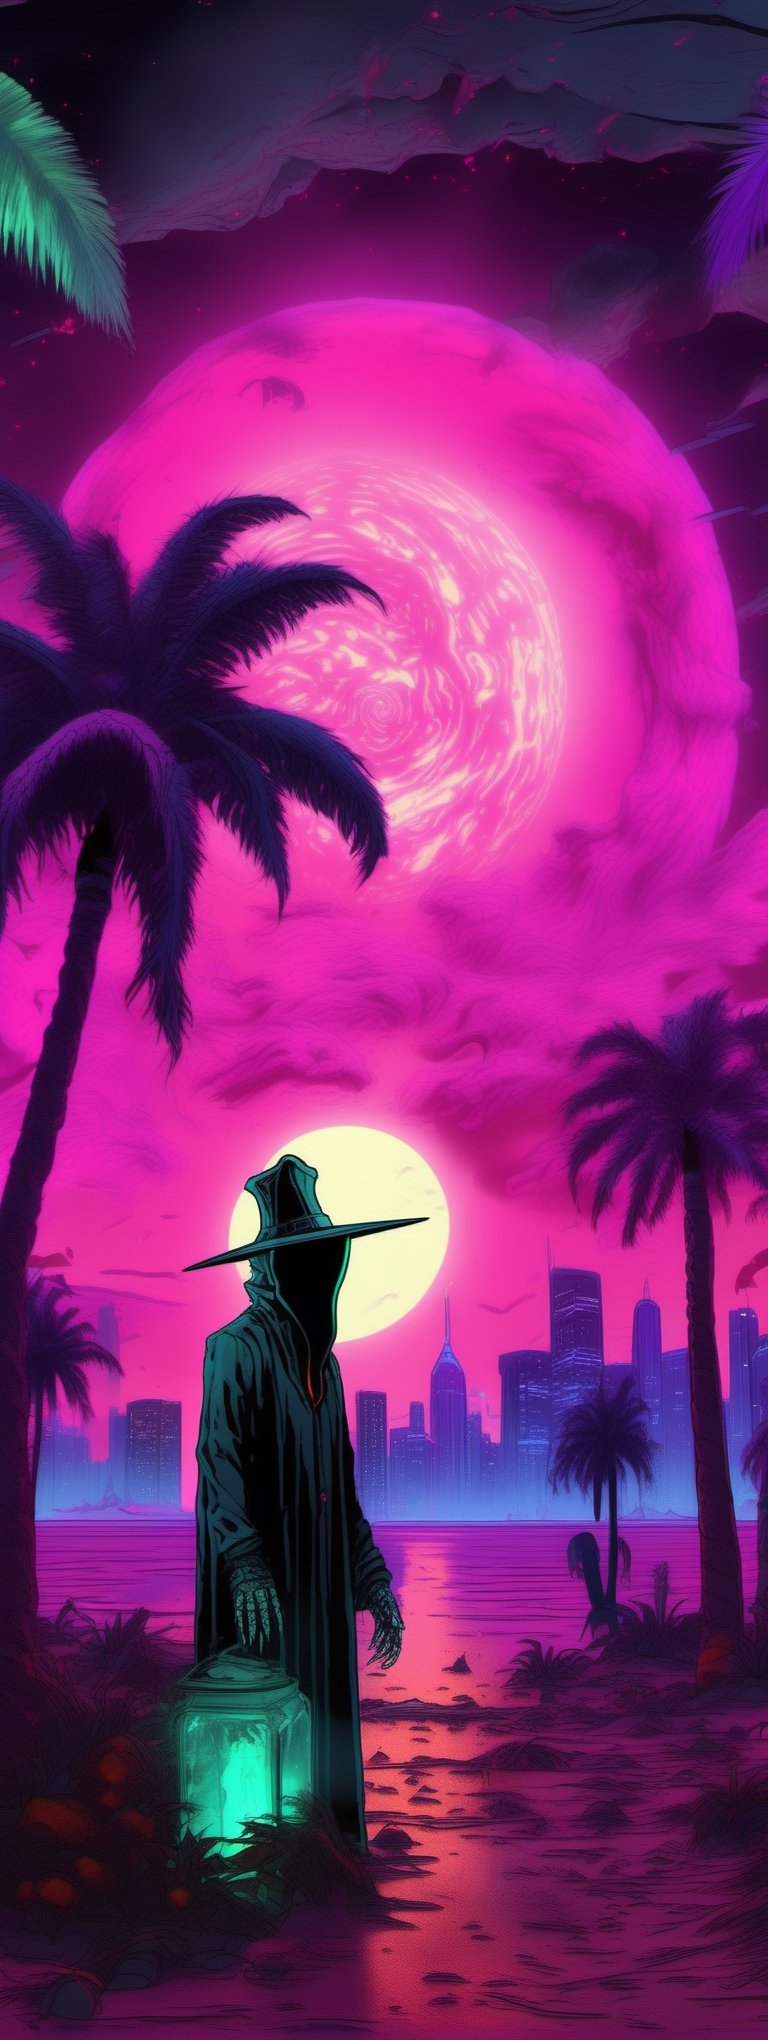 plague doctor candle jack-o-lanturn chimera, digital art, colorful spiral galaxy behind the clouds, halloween vaporwave spooky outrun creepy seapunk and horror synthwave, lush palm trees, clouds, giant moon in the background, intricate, insane level of detail, hyper-detailed, cinematic, inspiring composition, nostalgia and abstract, photorealistic, grand theft auto vice city gameplay screenshot, hotline miami gameplay screenshot, out run gameplay screenshot, need for speed underground gameplay screenshot, tokyo drift, hong kong, the capital of japan
